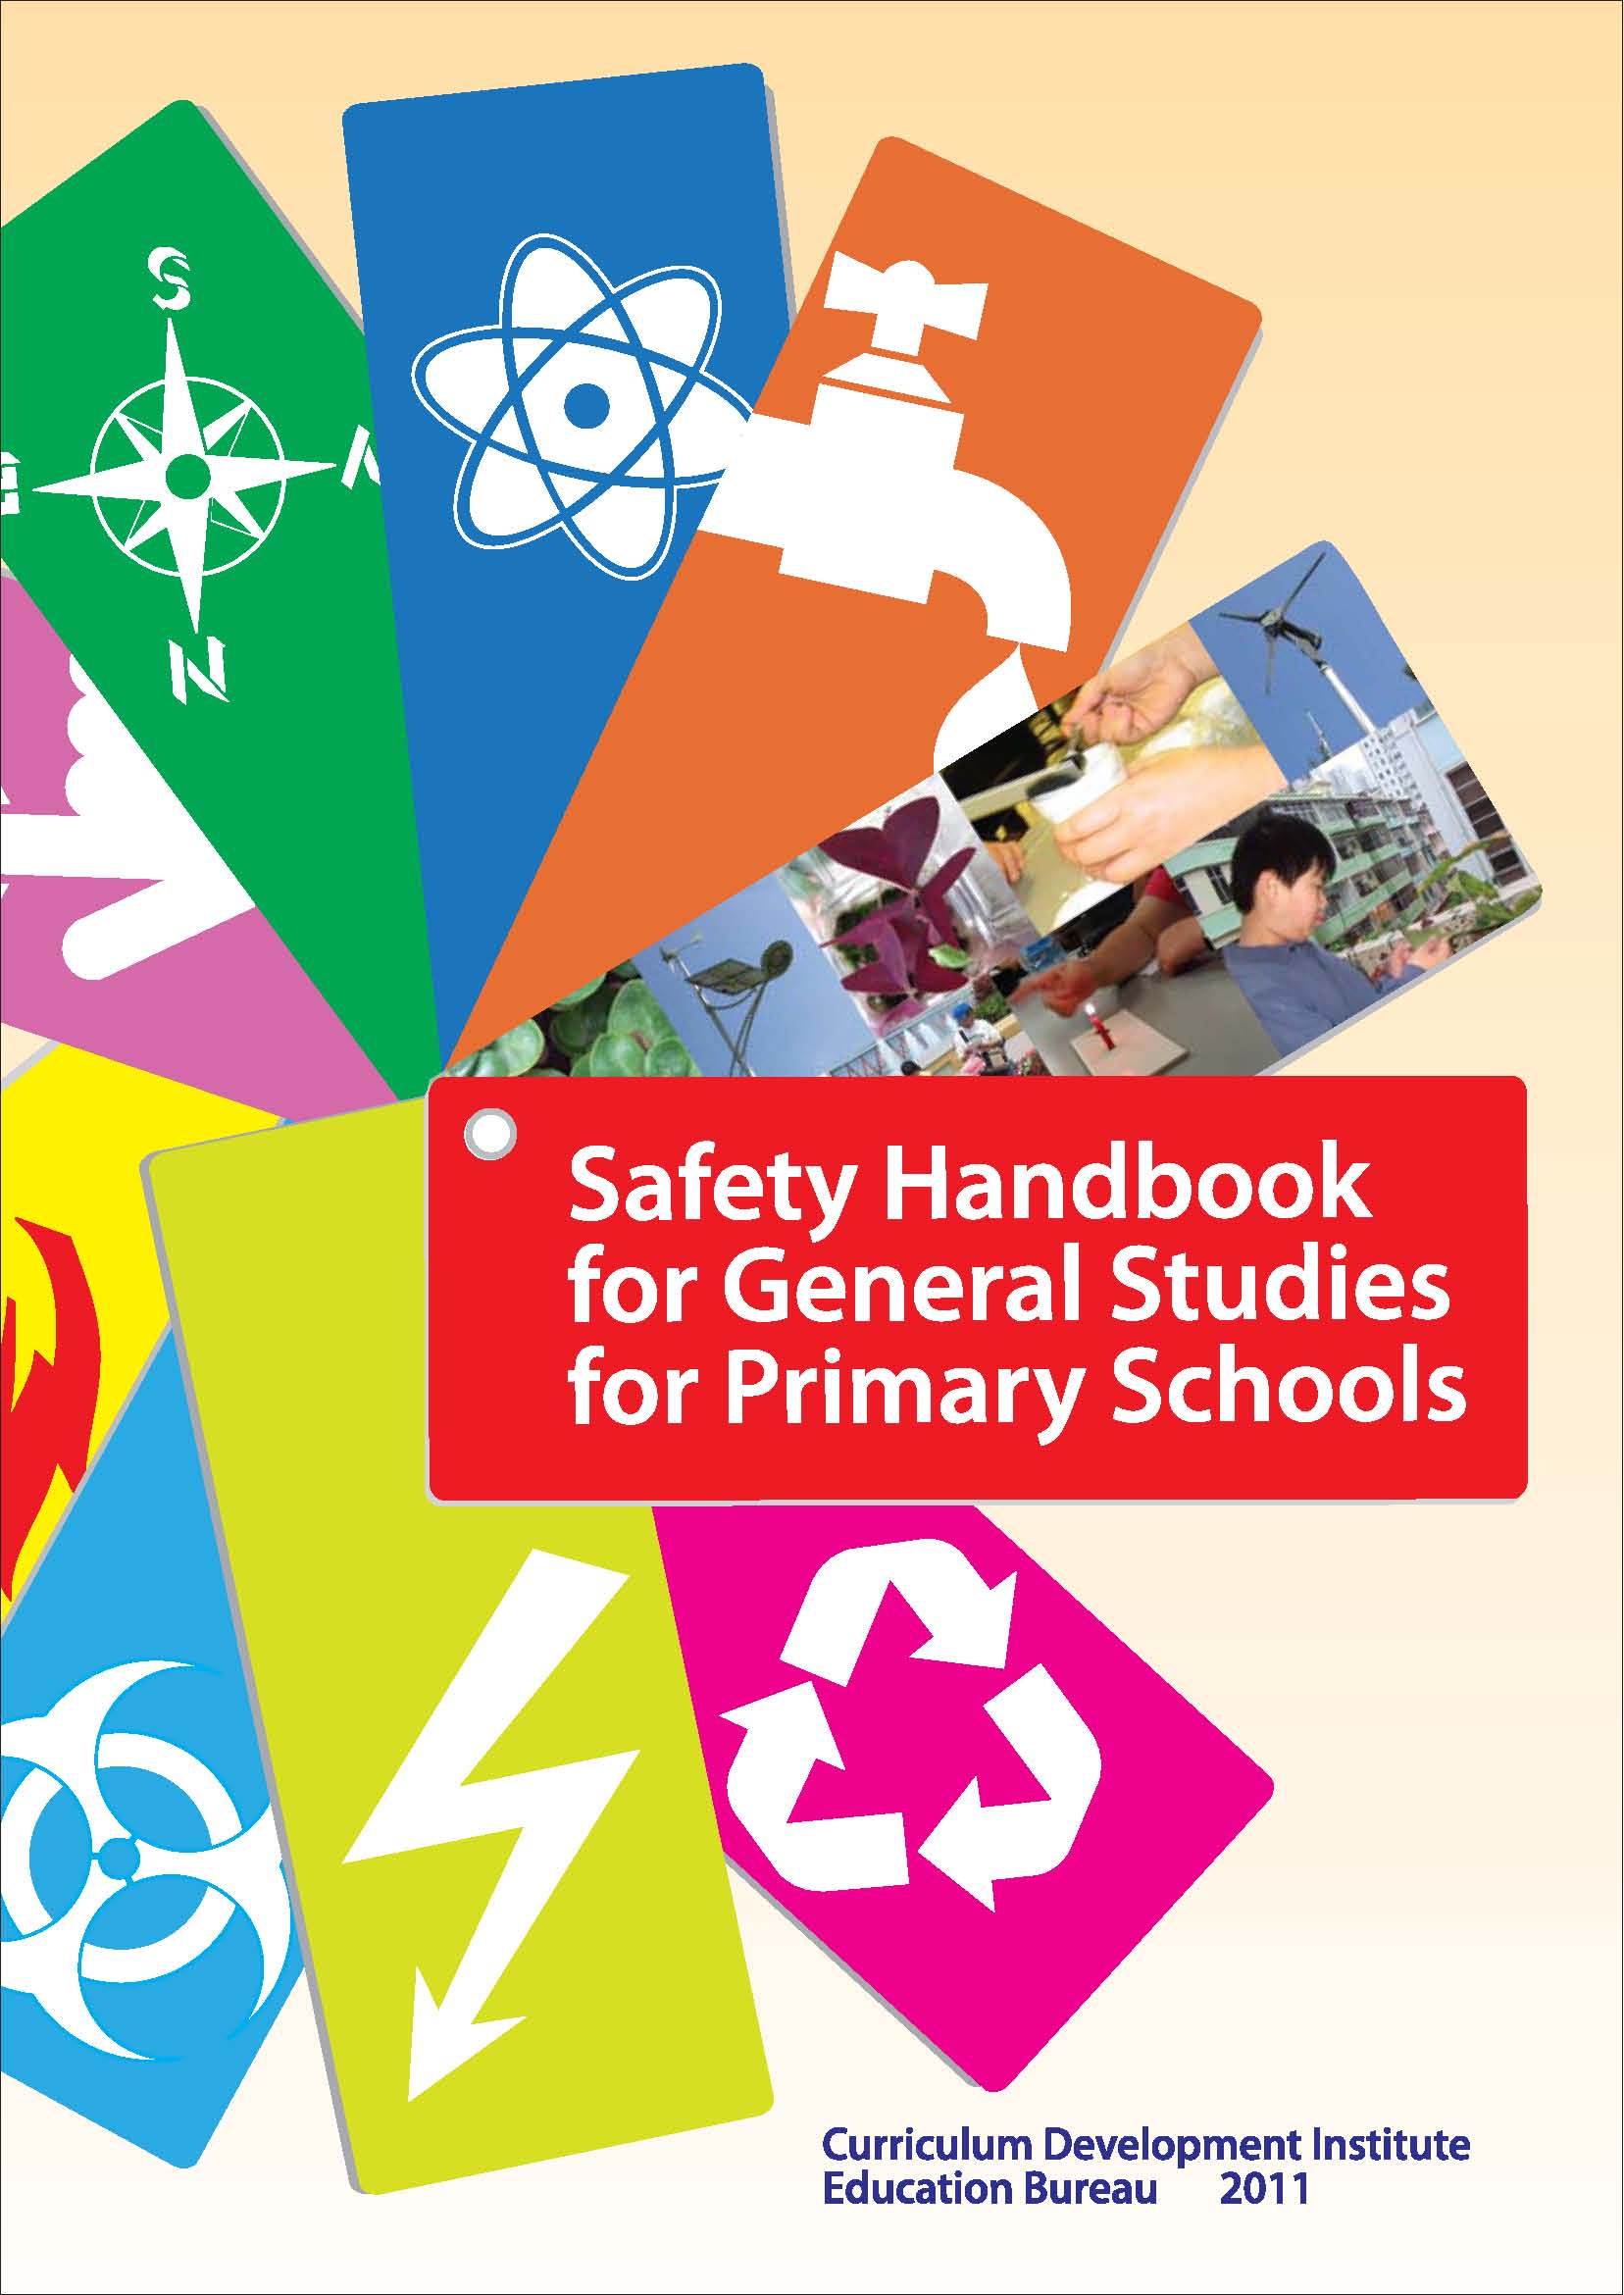 Safety Handbook for General Studies for Primary Schools